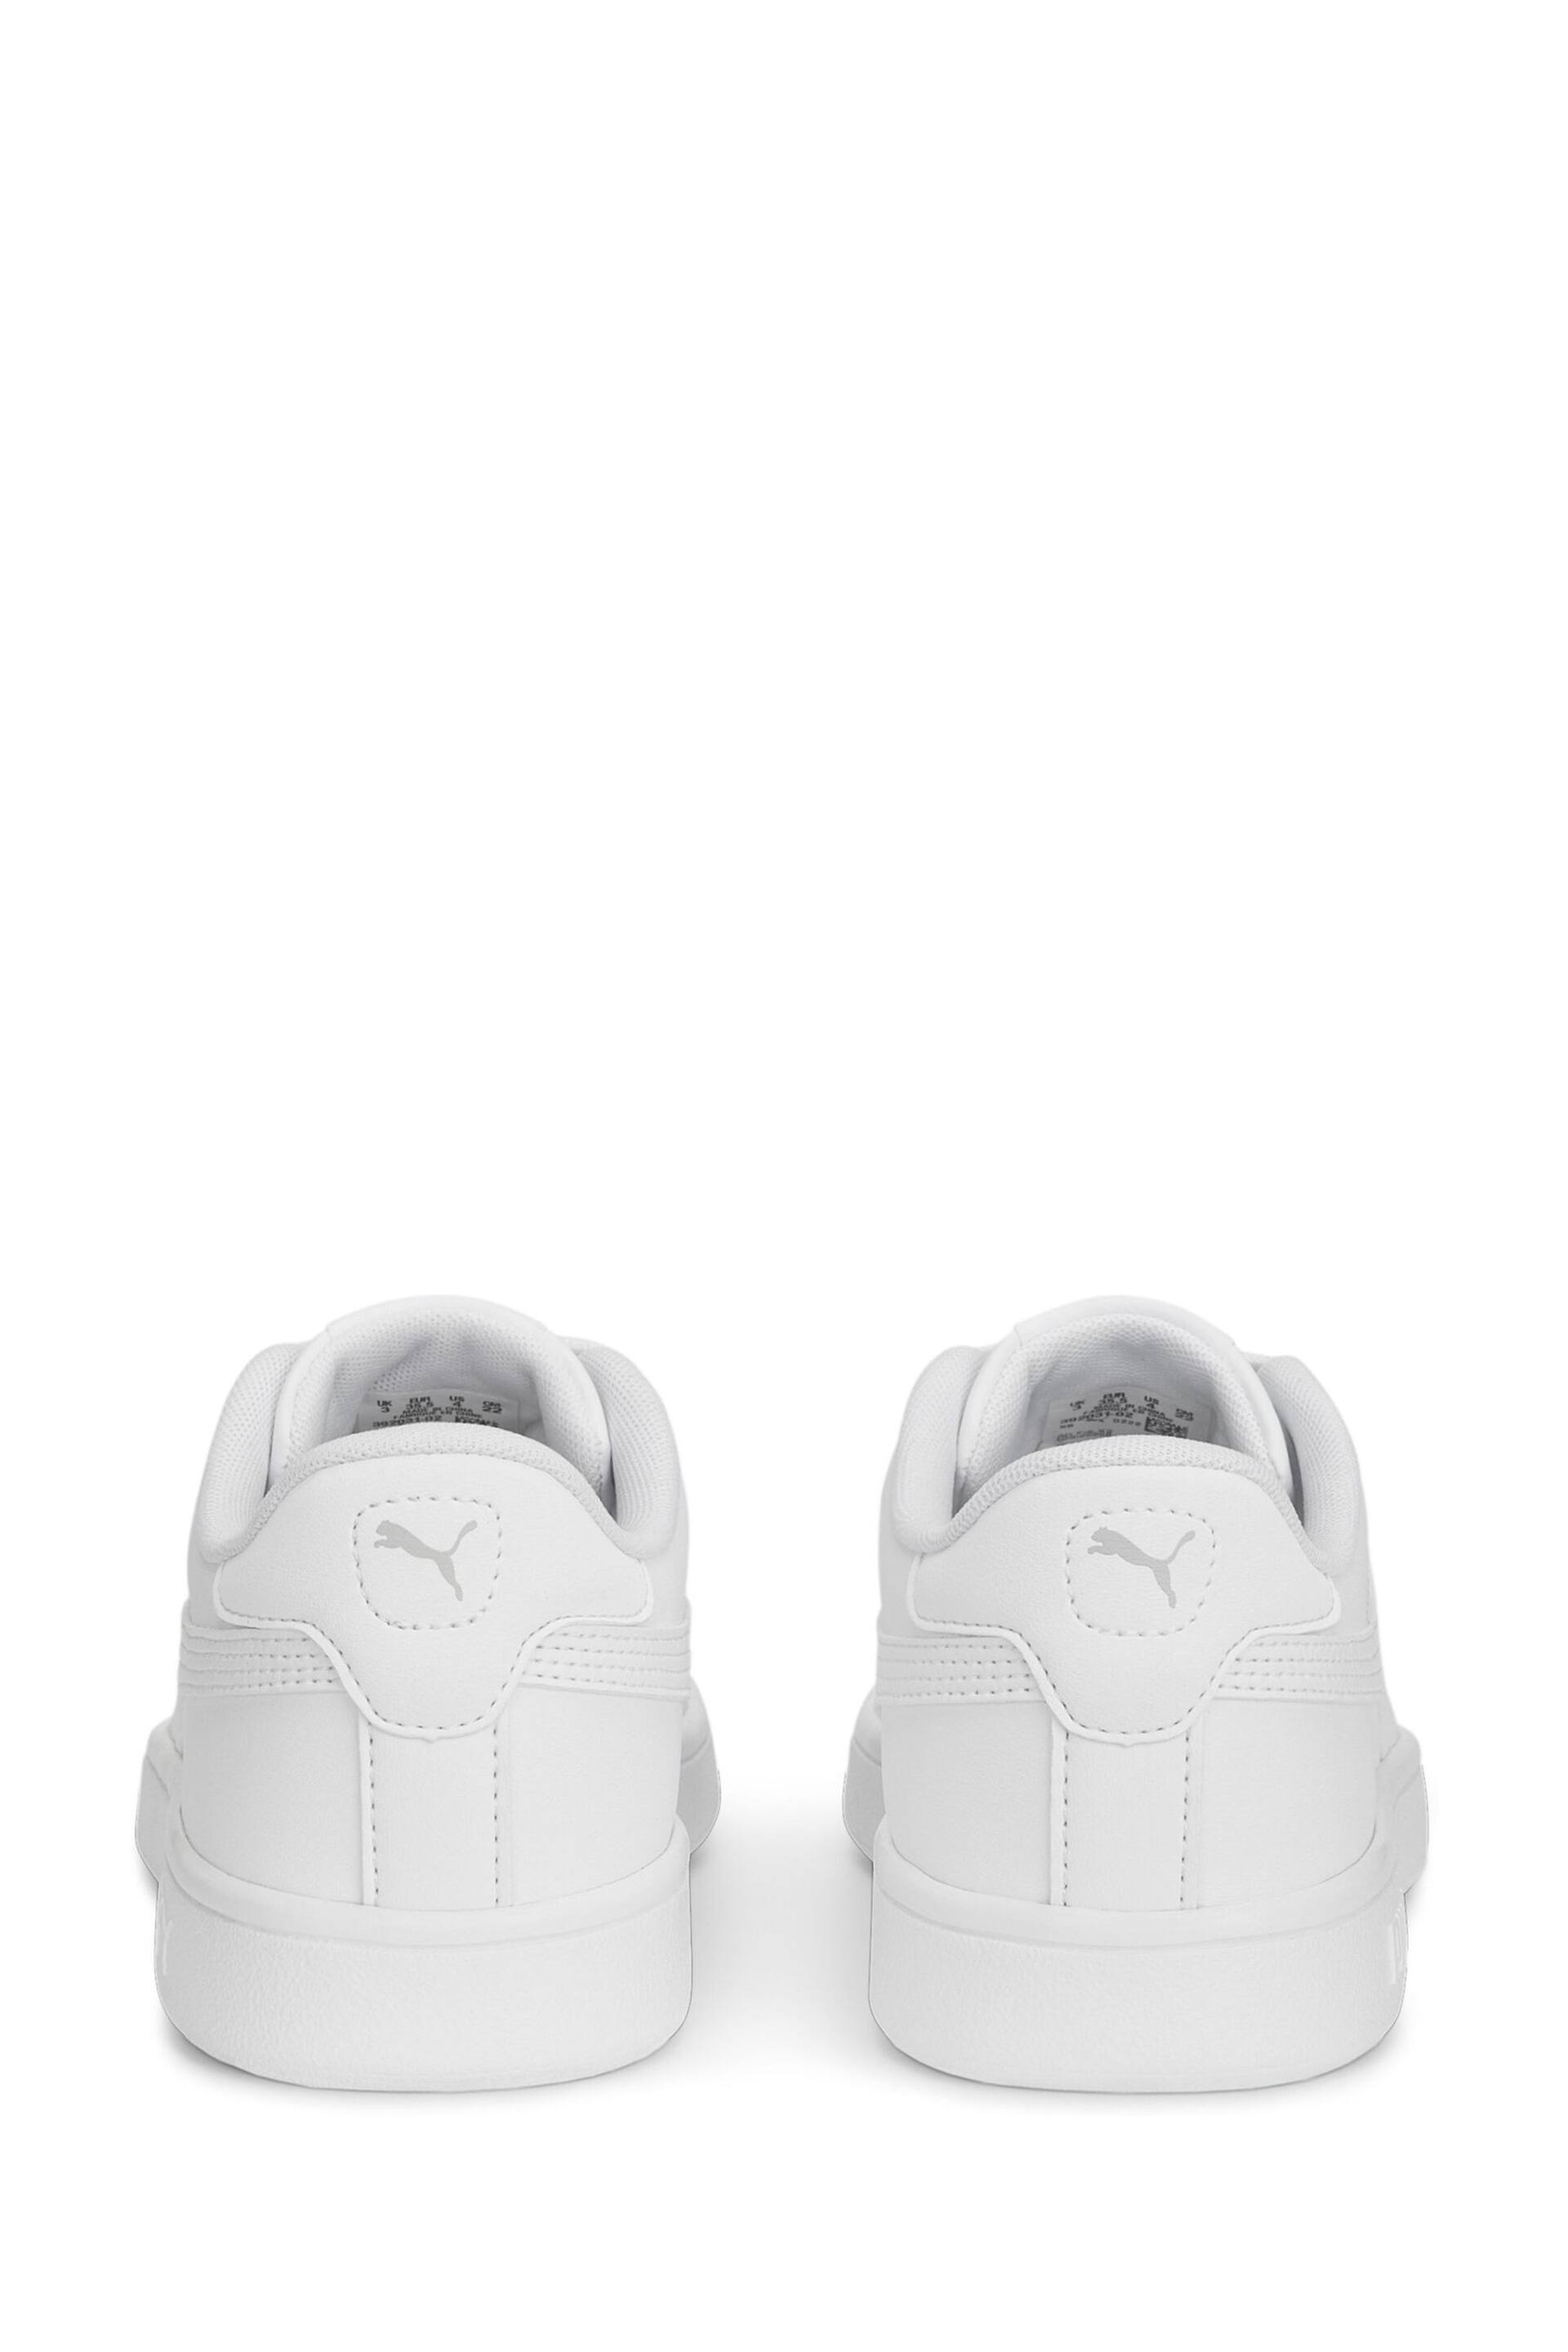 Puma White Smash 3.0 Leather Youth Trainers - Image 4 of 6